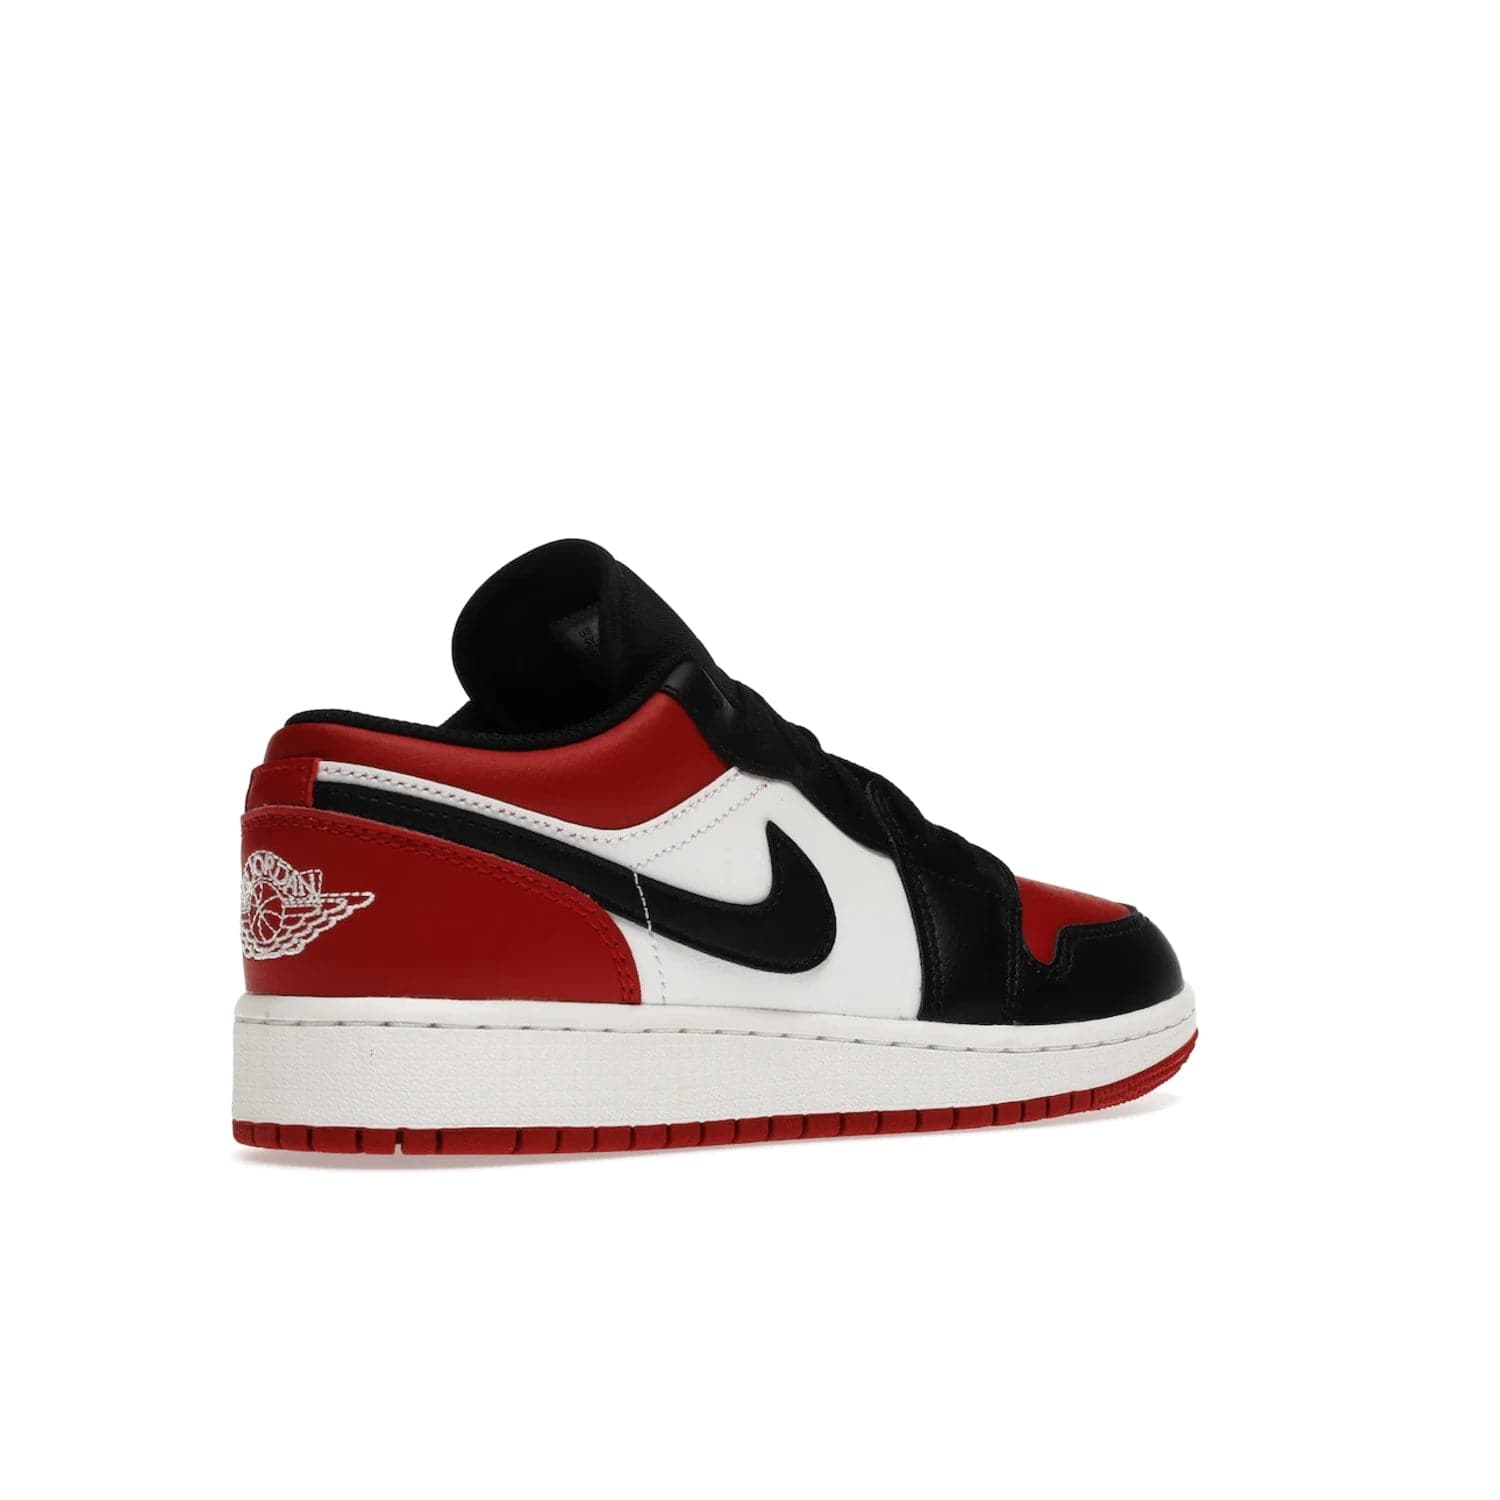 Jordan 1 Low Bred Toe (GS) - Image 33 - Only at www.BallersClubKickz.com - #
Iconic sneaker from Jordan brand with classic colorway, unique detailing & Air Jordan Wings logo. Step into the shoes of the greats with the Jordan 1 Low Bred Toe GS!